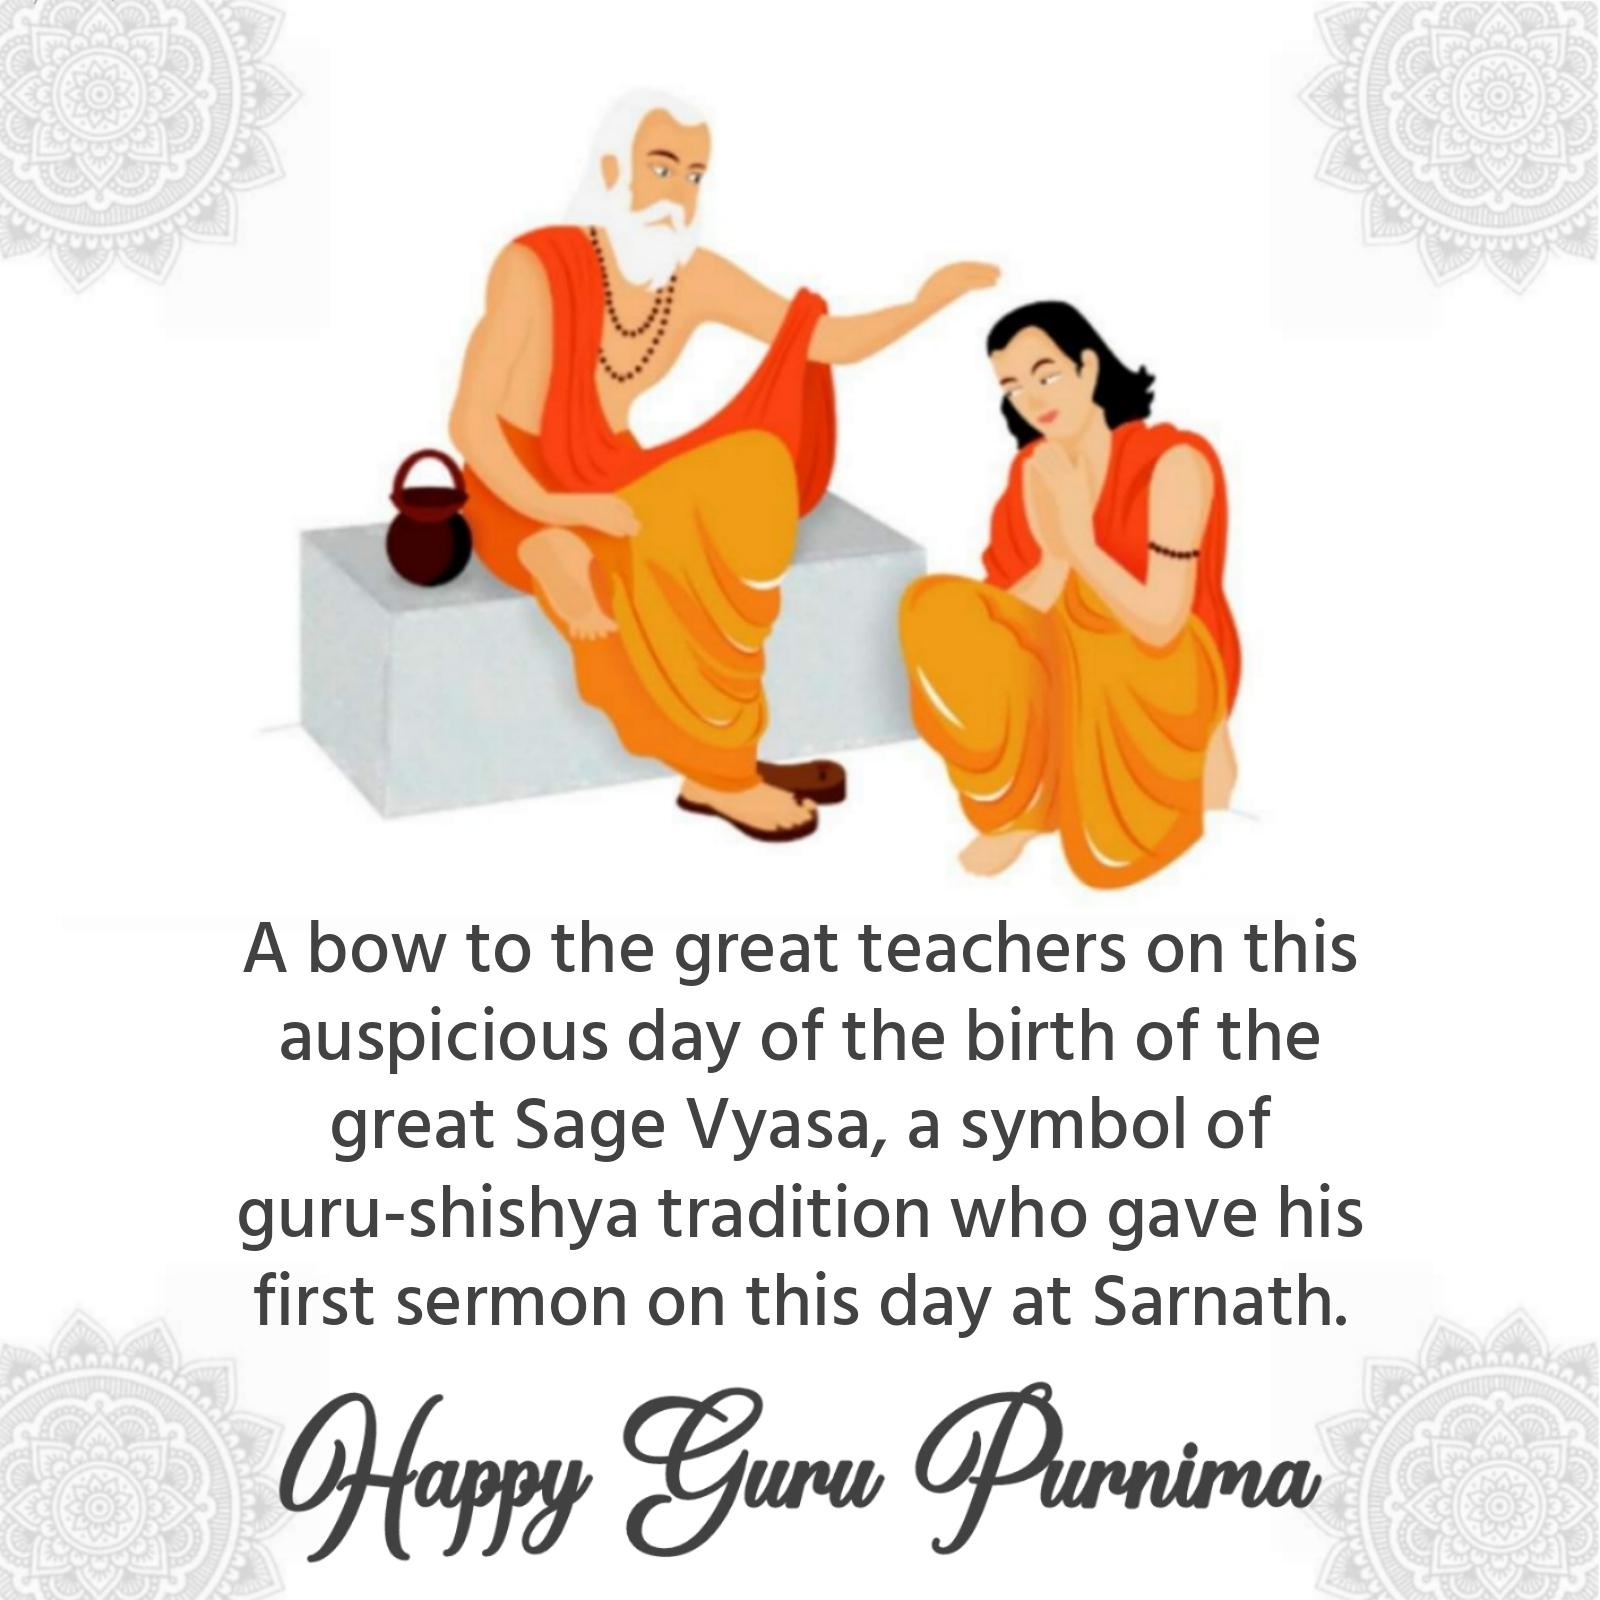 A bow to the great teachers on this auspicious day of the birth of the great Sage Vyasa